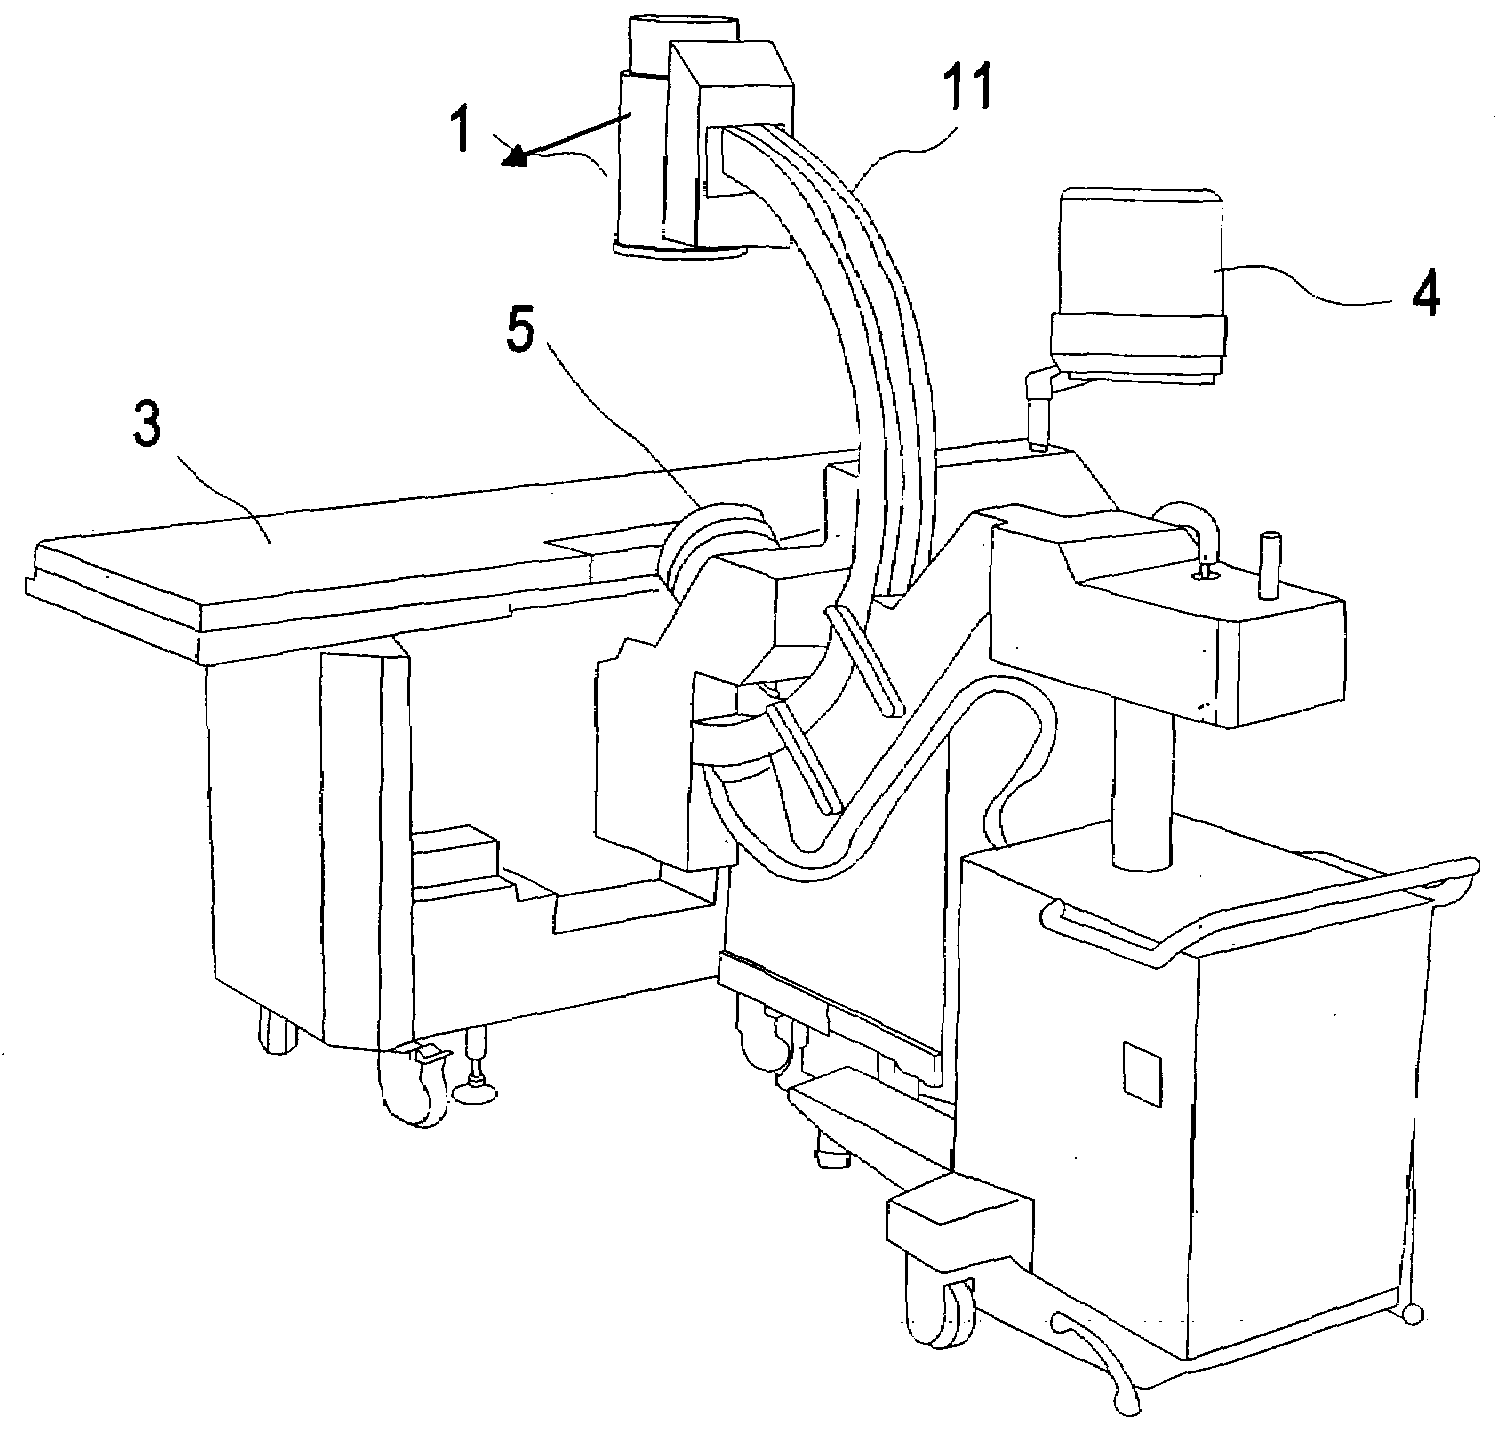 Lithotripter with stone tracking and locking localization system